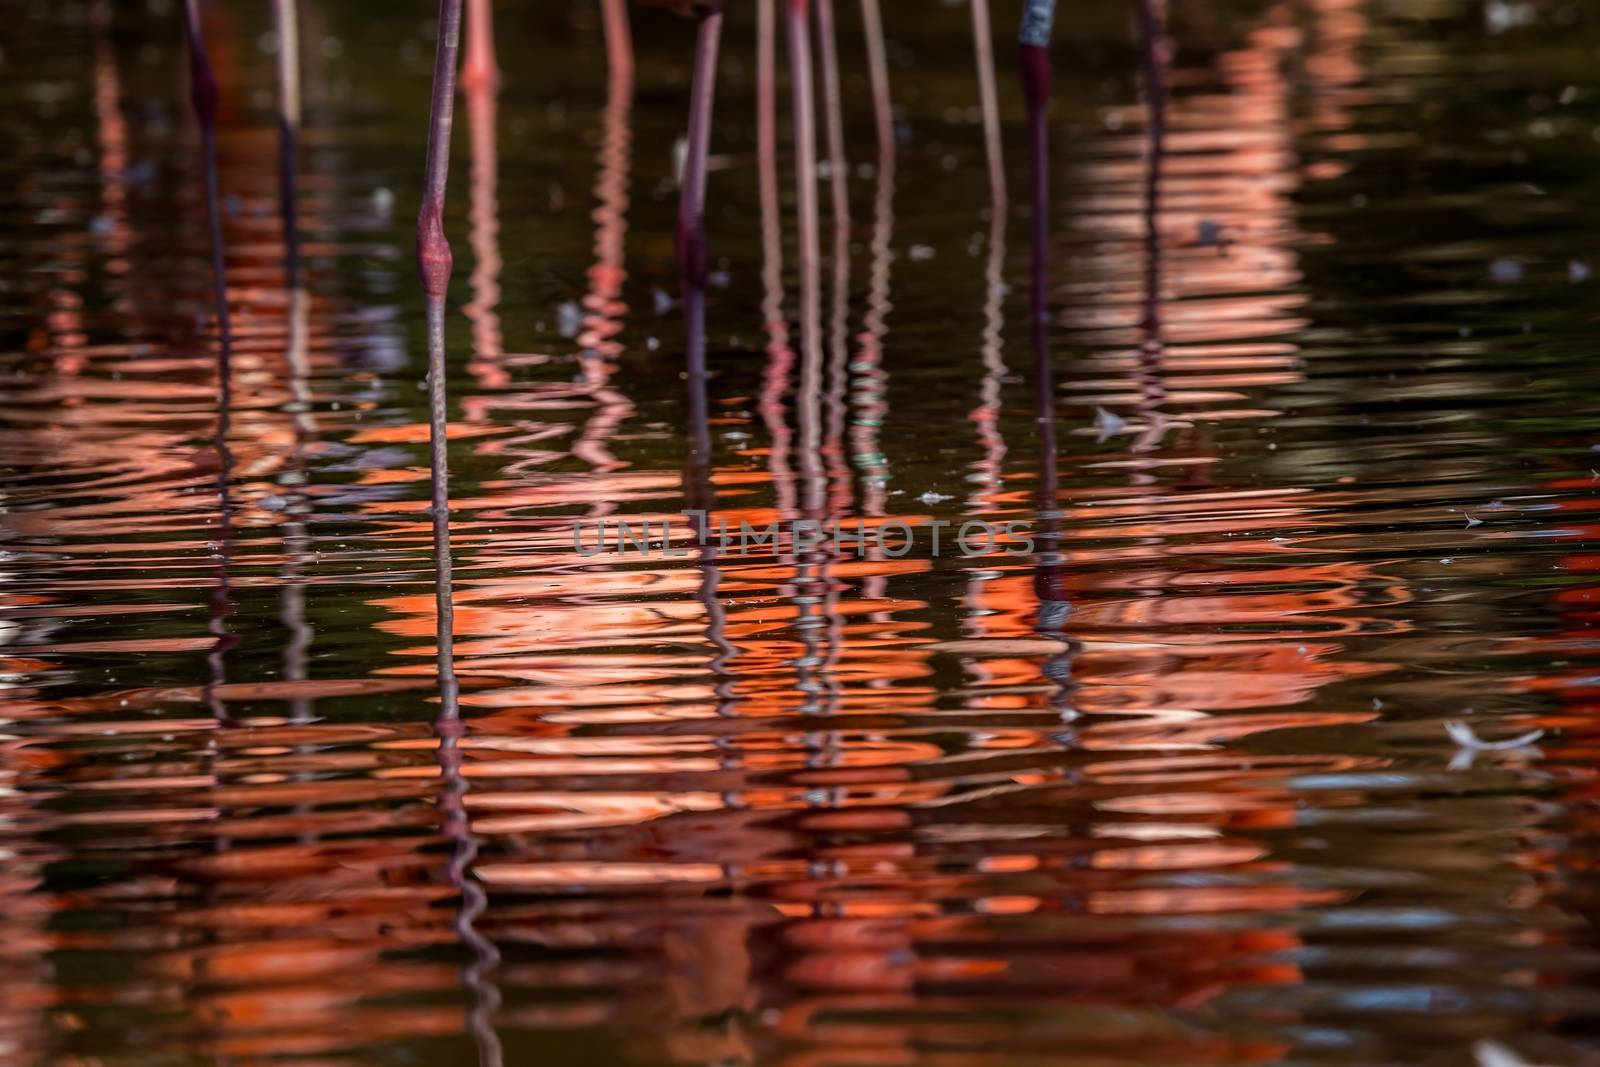 Flamingos reflection on the water by Digoarpi